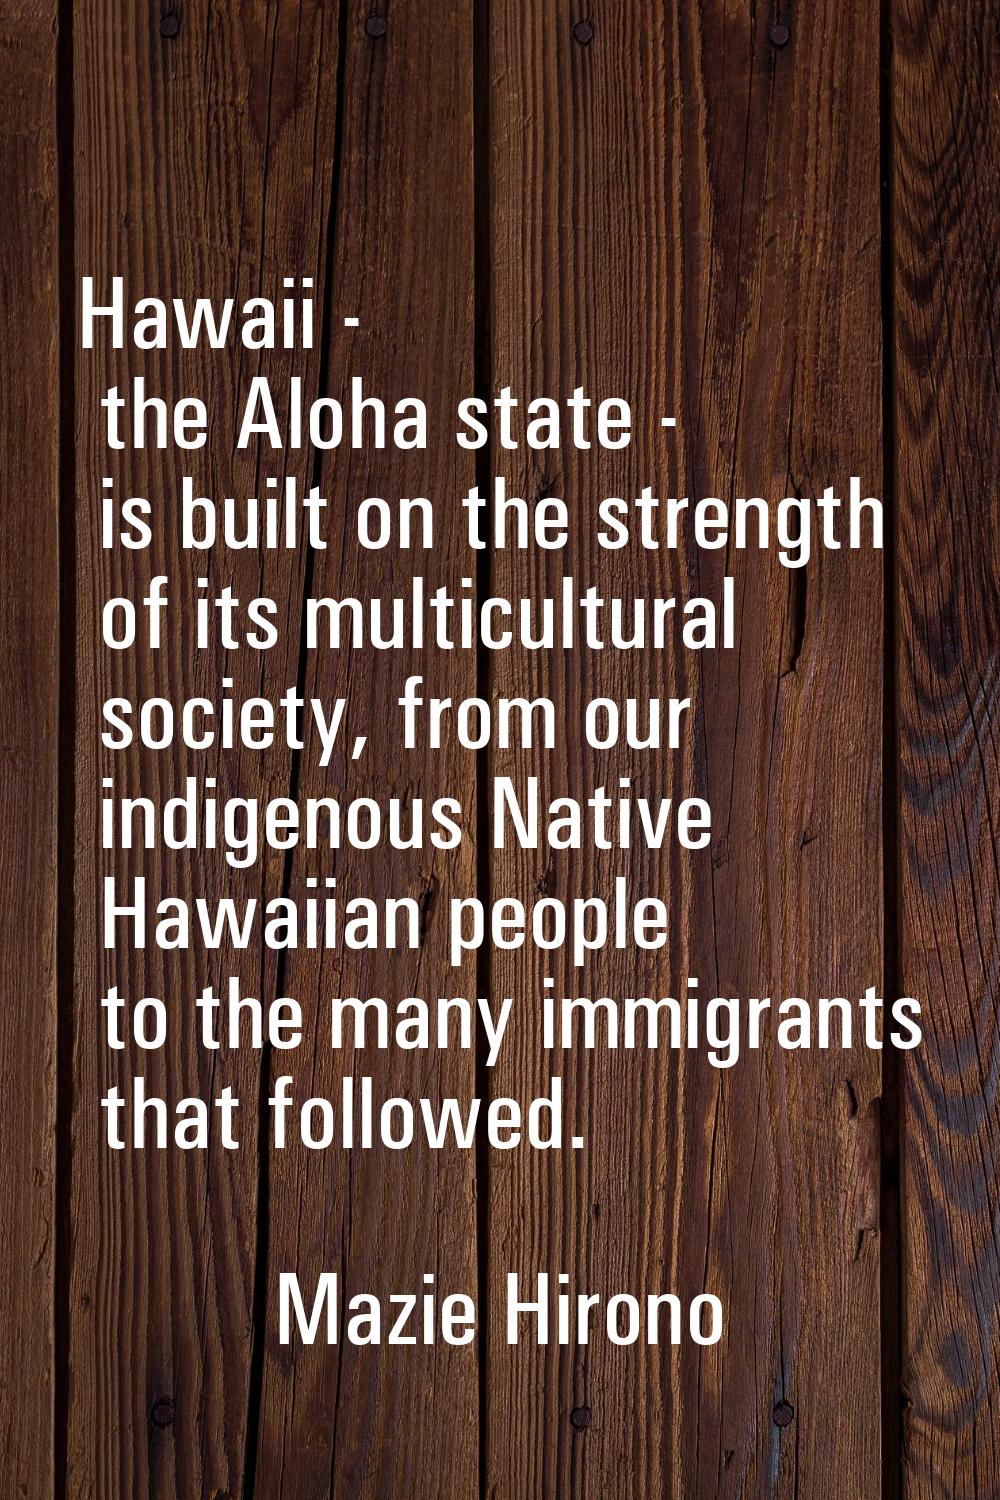 Hawaii - the Aloha state - is built on the strength of its multicultural society, from our indigeno